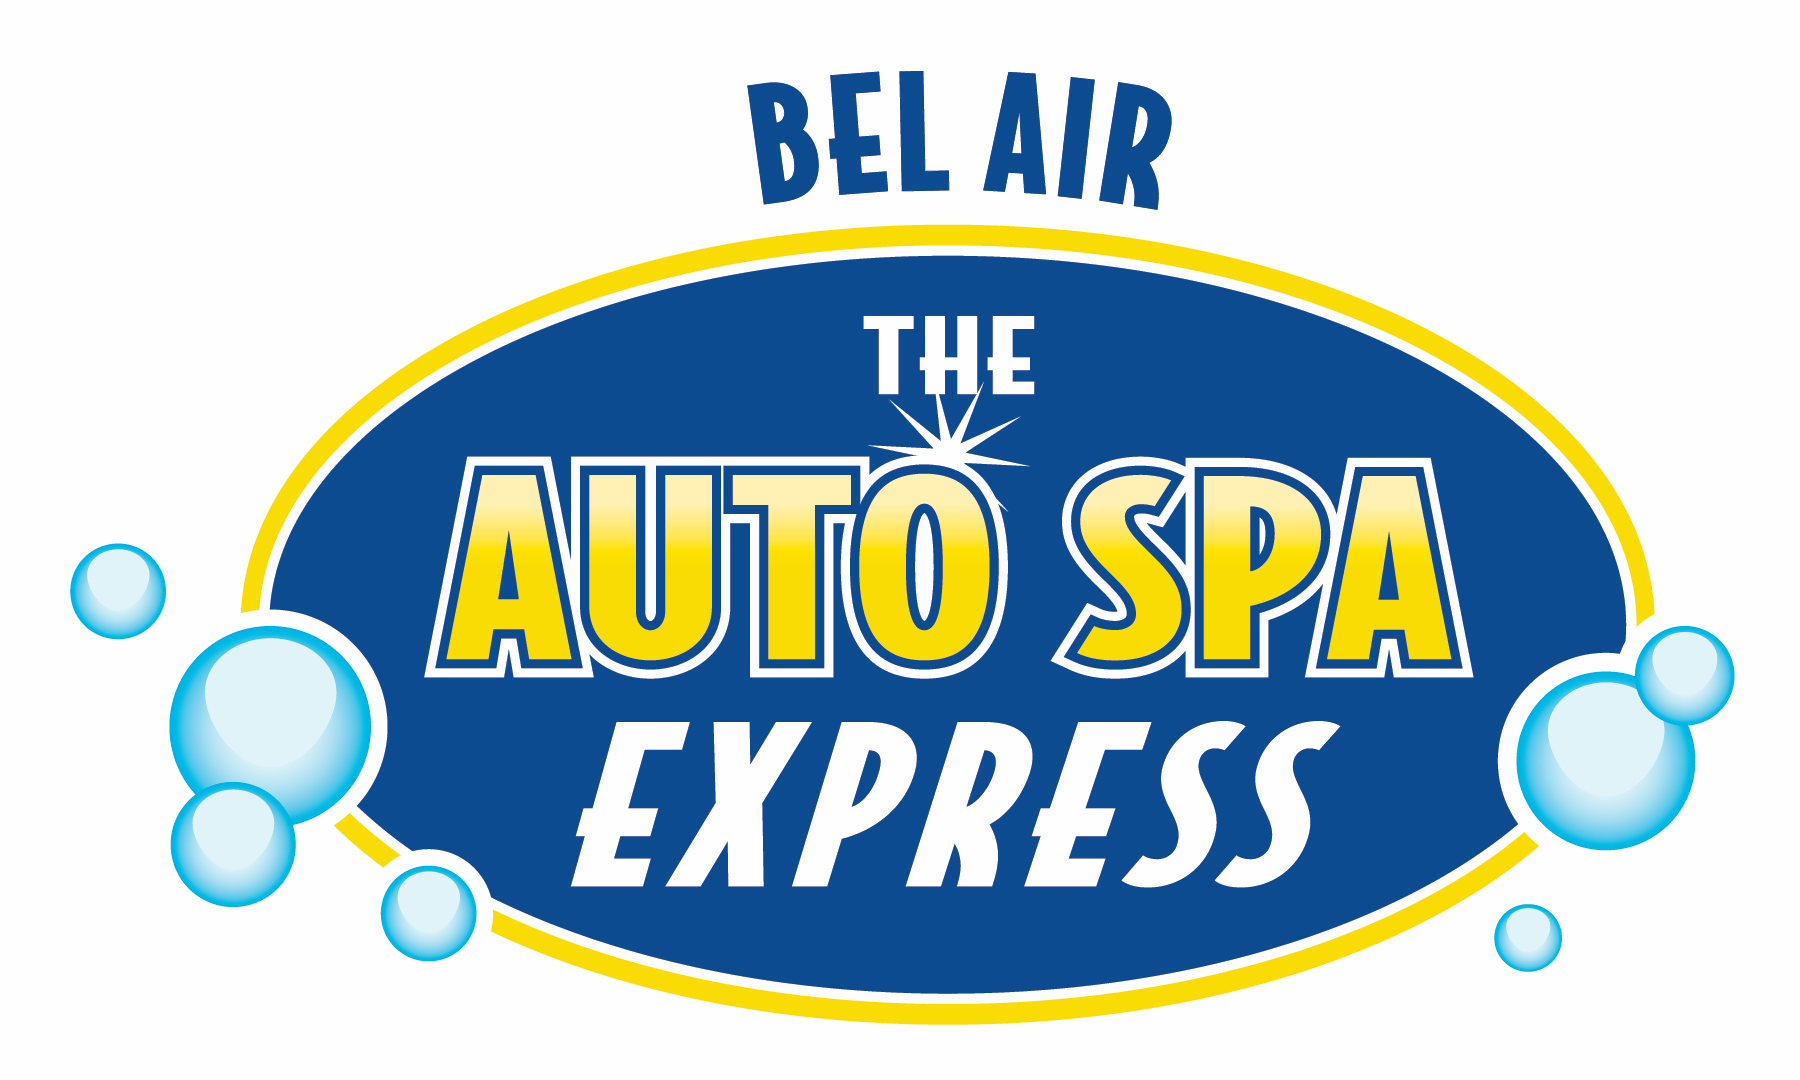 The Bel Air Auto Spa Express